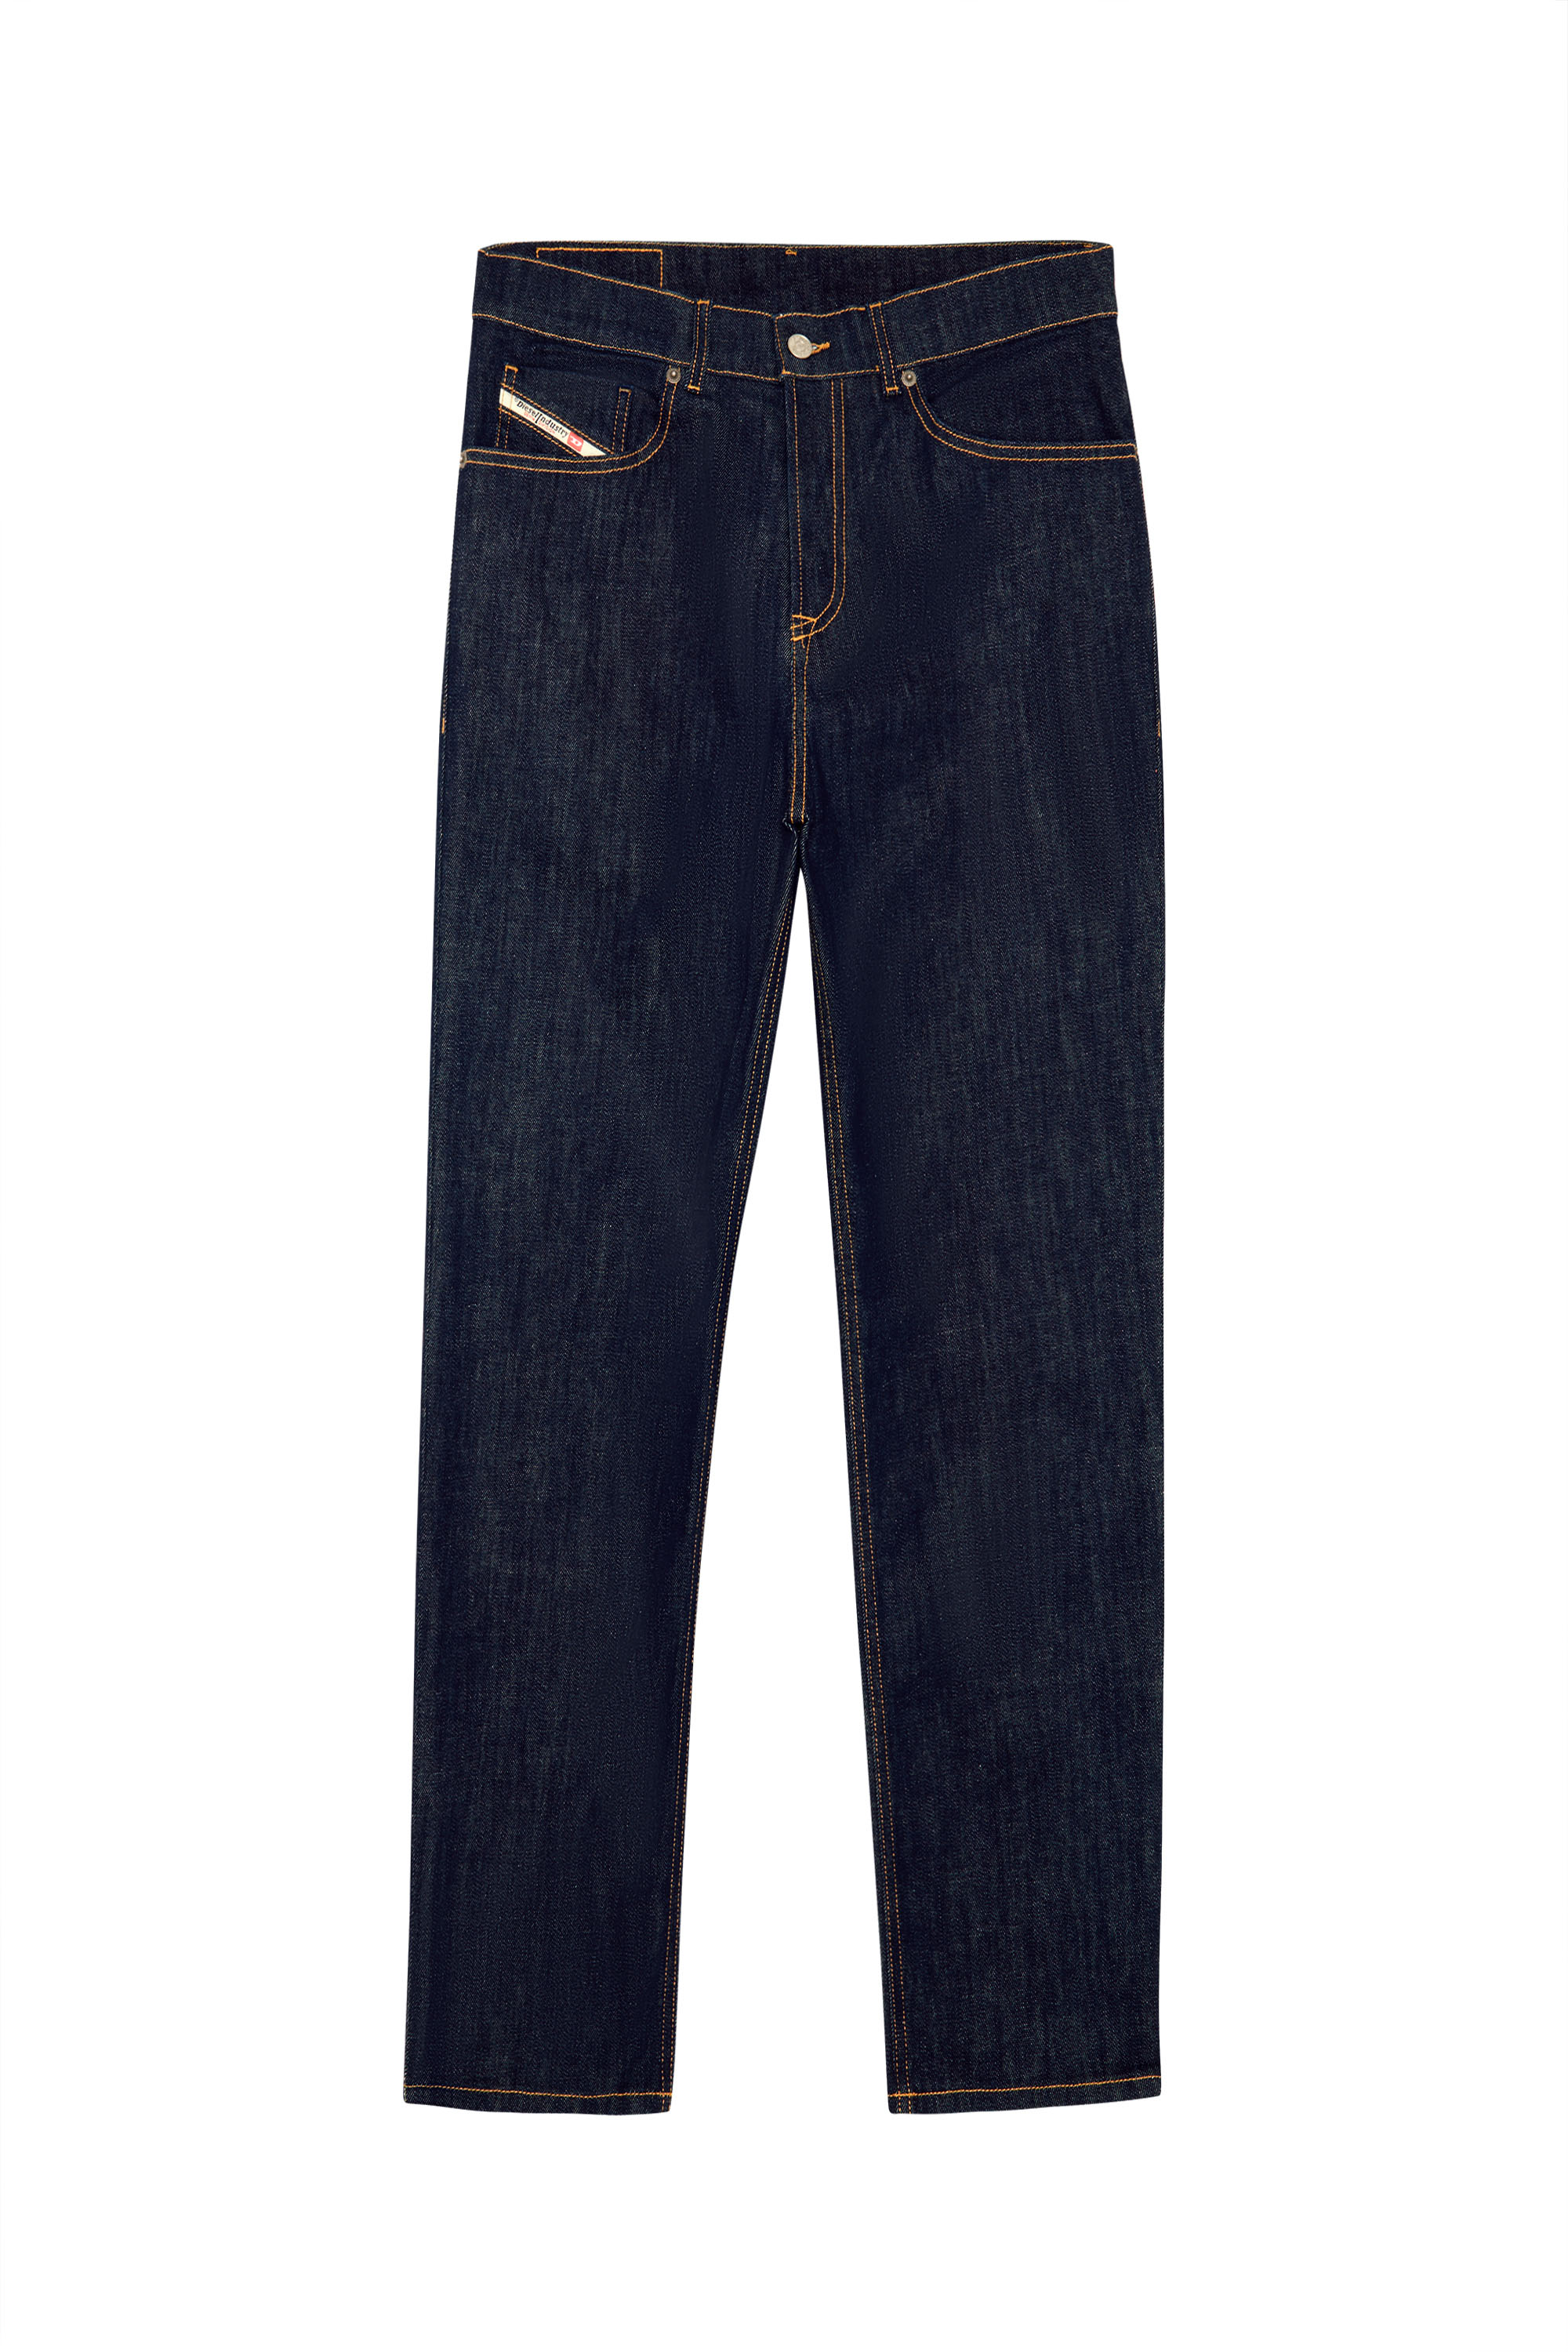 2005 D-Fining Z9B89 Tapered Jeans, Dark Blue - Jeans